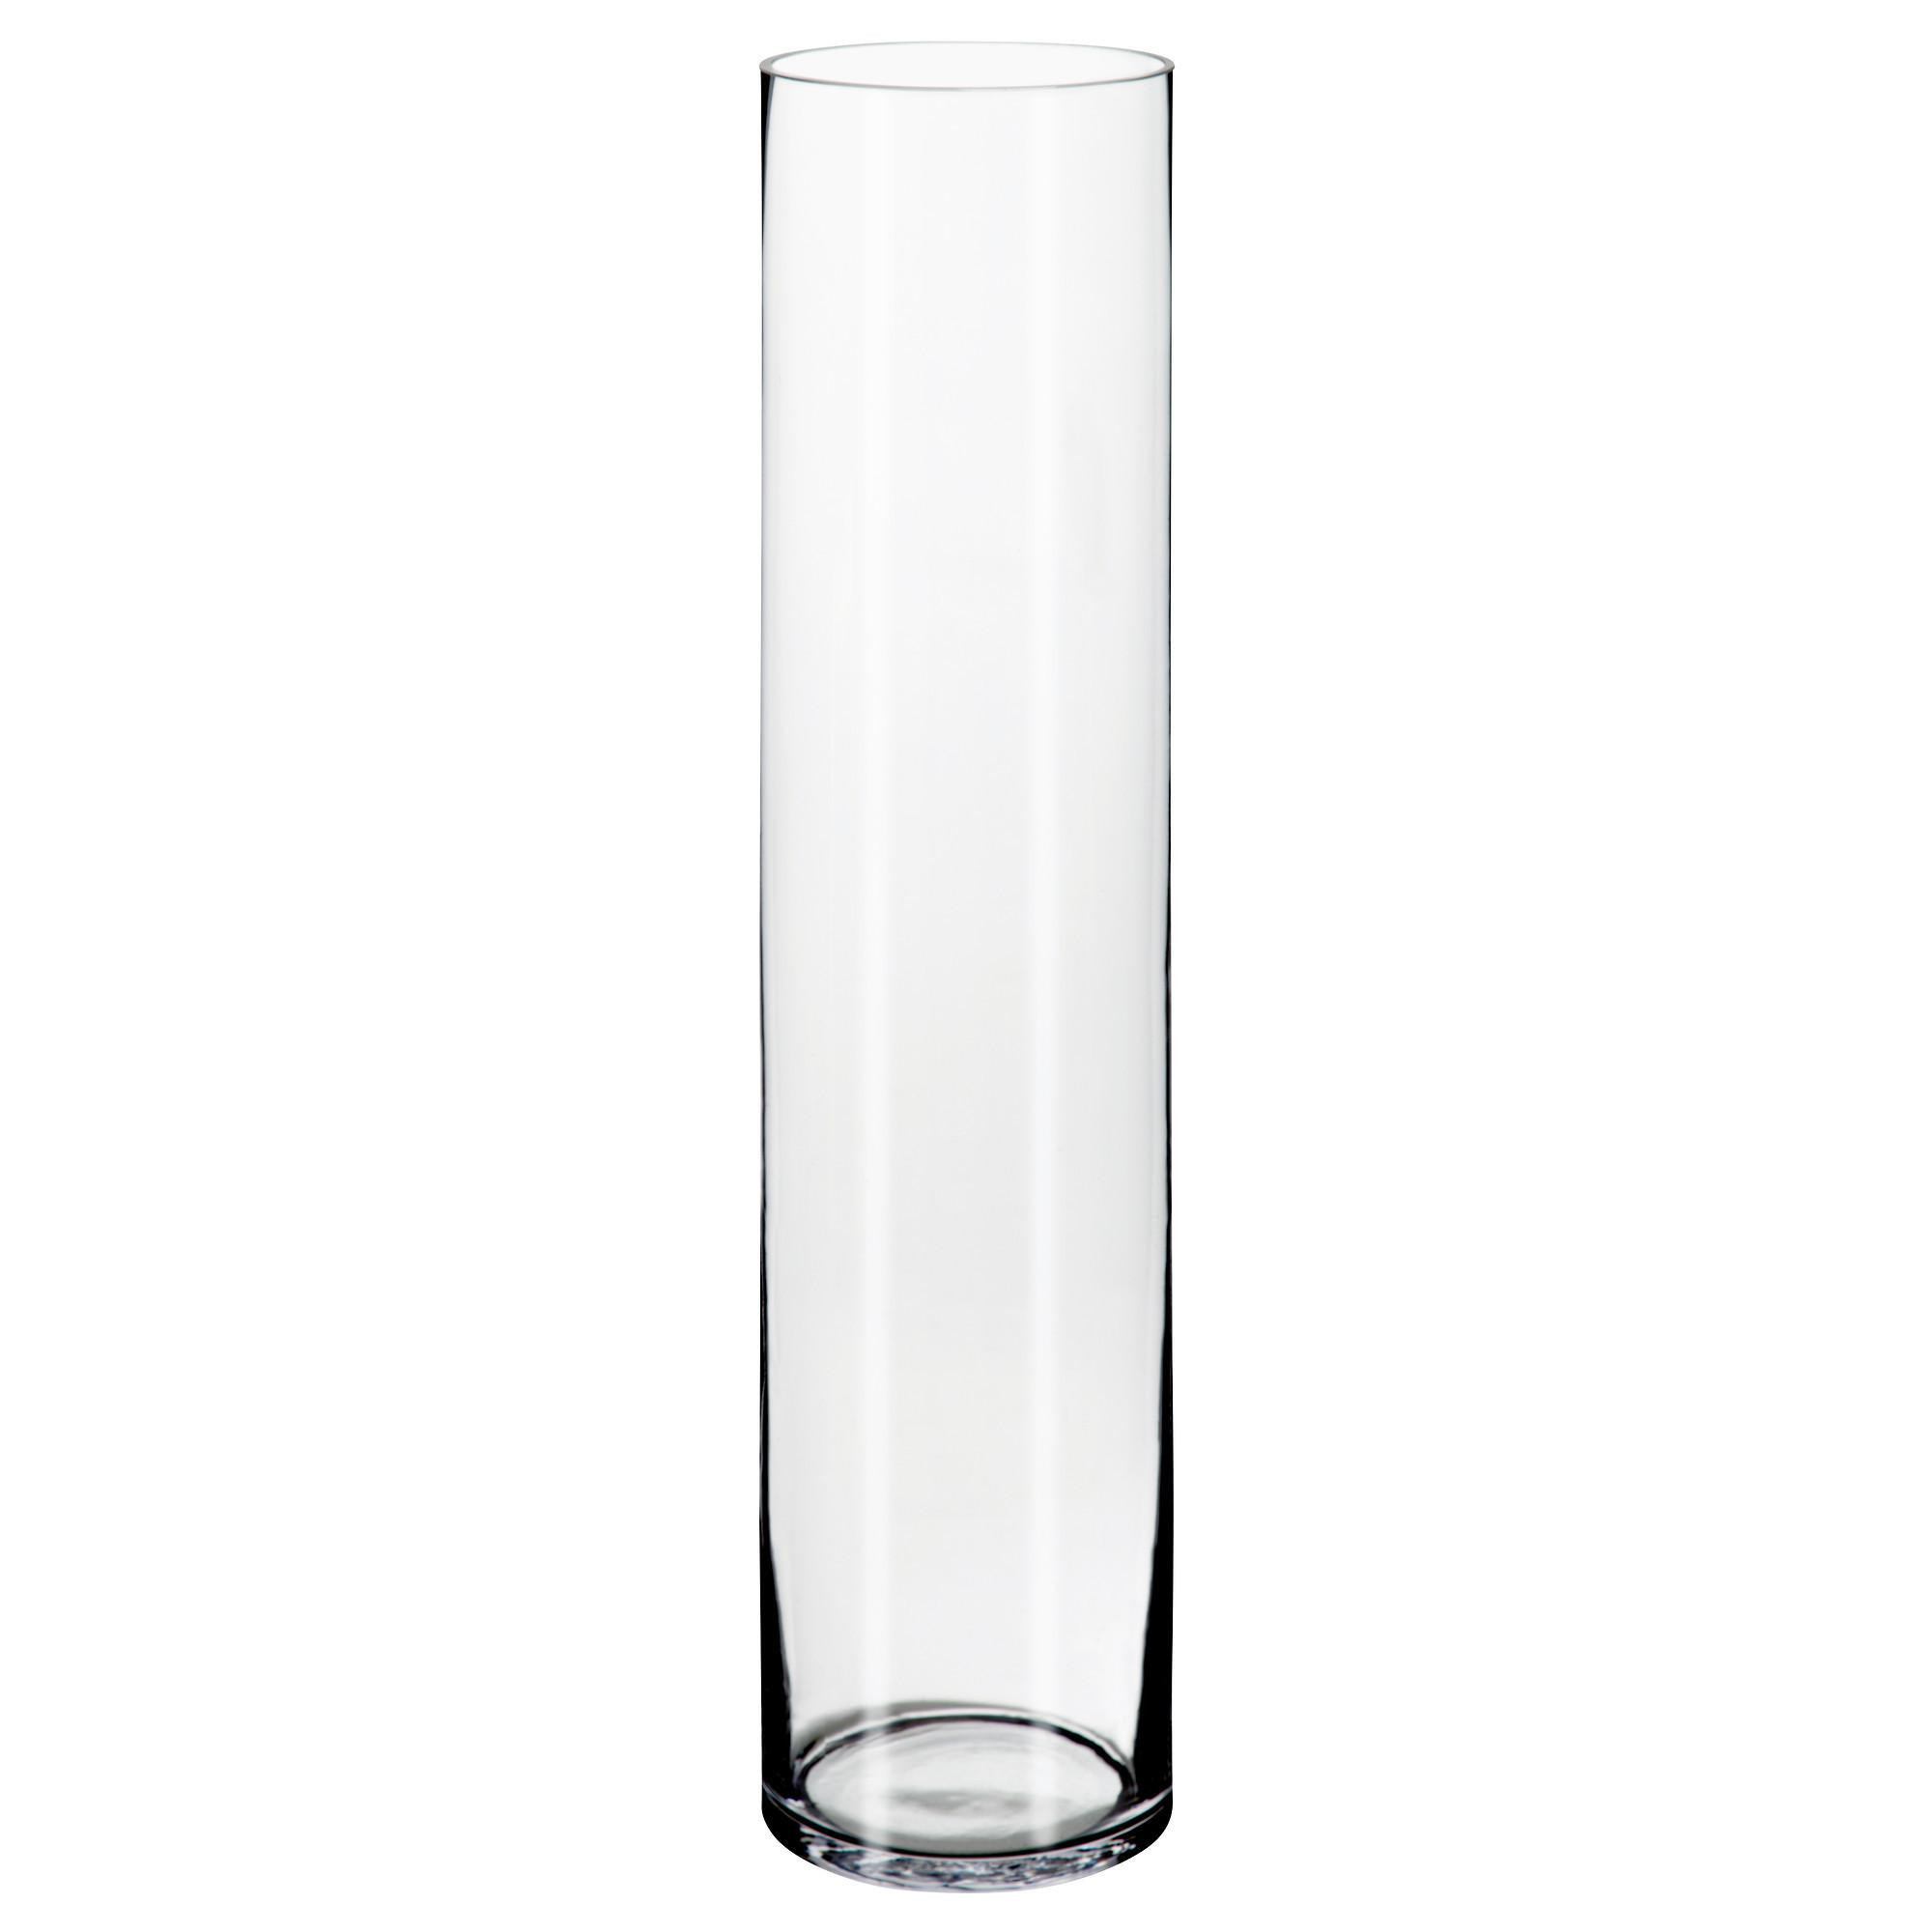 16 attractive 16 Inch Glass Vase 2024 free download 16 inch glass vase of black glass vases photos living room vase glass lovely cheap glass in black glass vases pictures coloring colored glass vases elegant living room vase glass fresh of bl